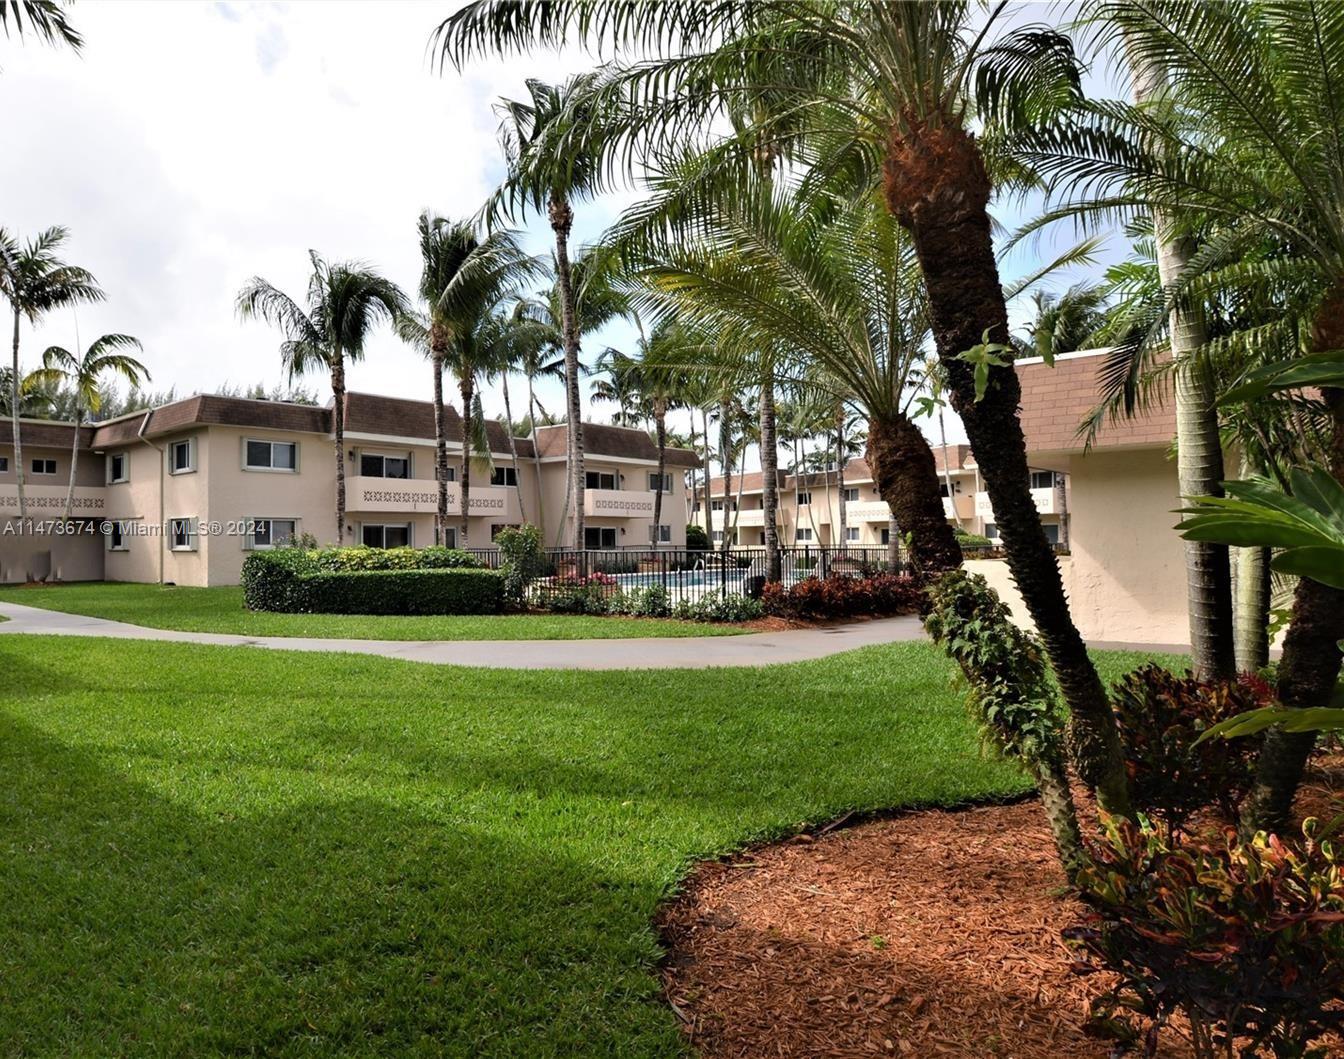 14500 SW 88th Ave 128, Palmetto Bay, Florida 33176, 1 Bedroom Bedrooms, ,1 BathroomBathrooms,Residentiallease,For Rent,14500 SW 88th Ave 128,A11473674